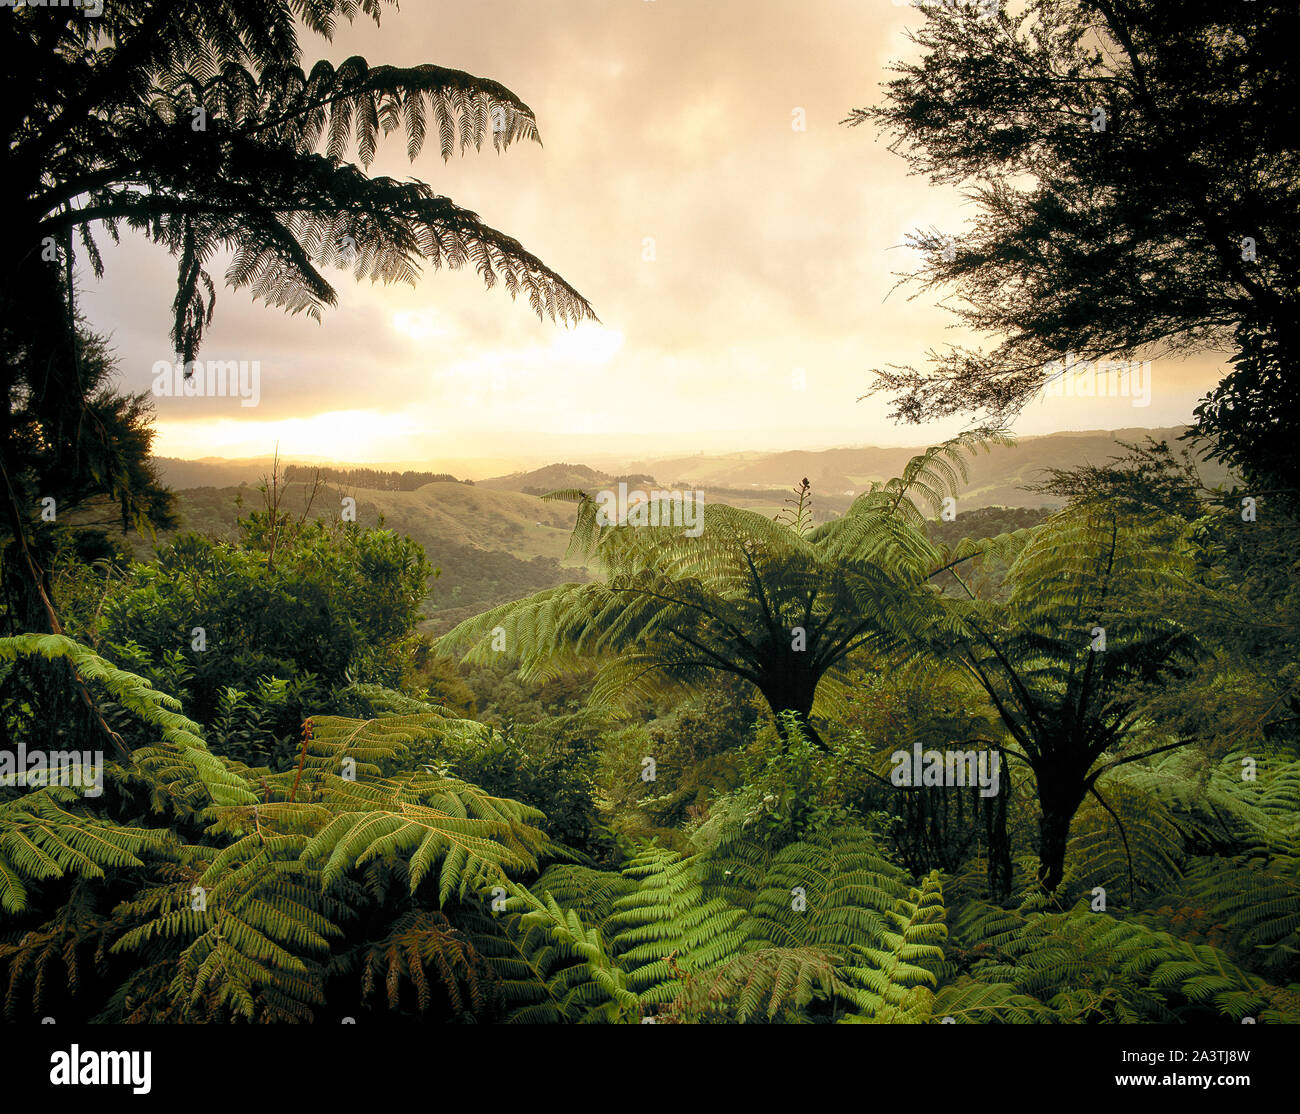 New Zealand. North Island. View of hills from forest with tree ferns. Stock Photo